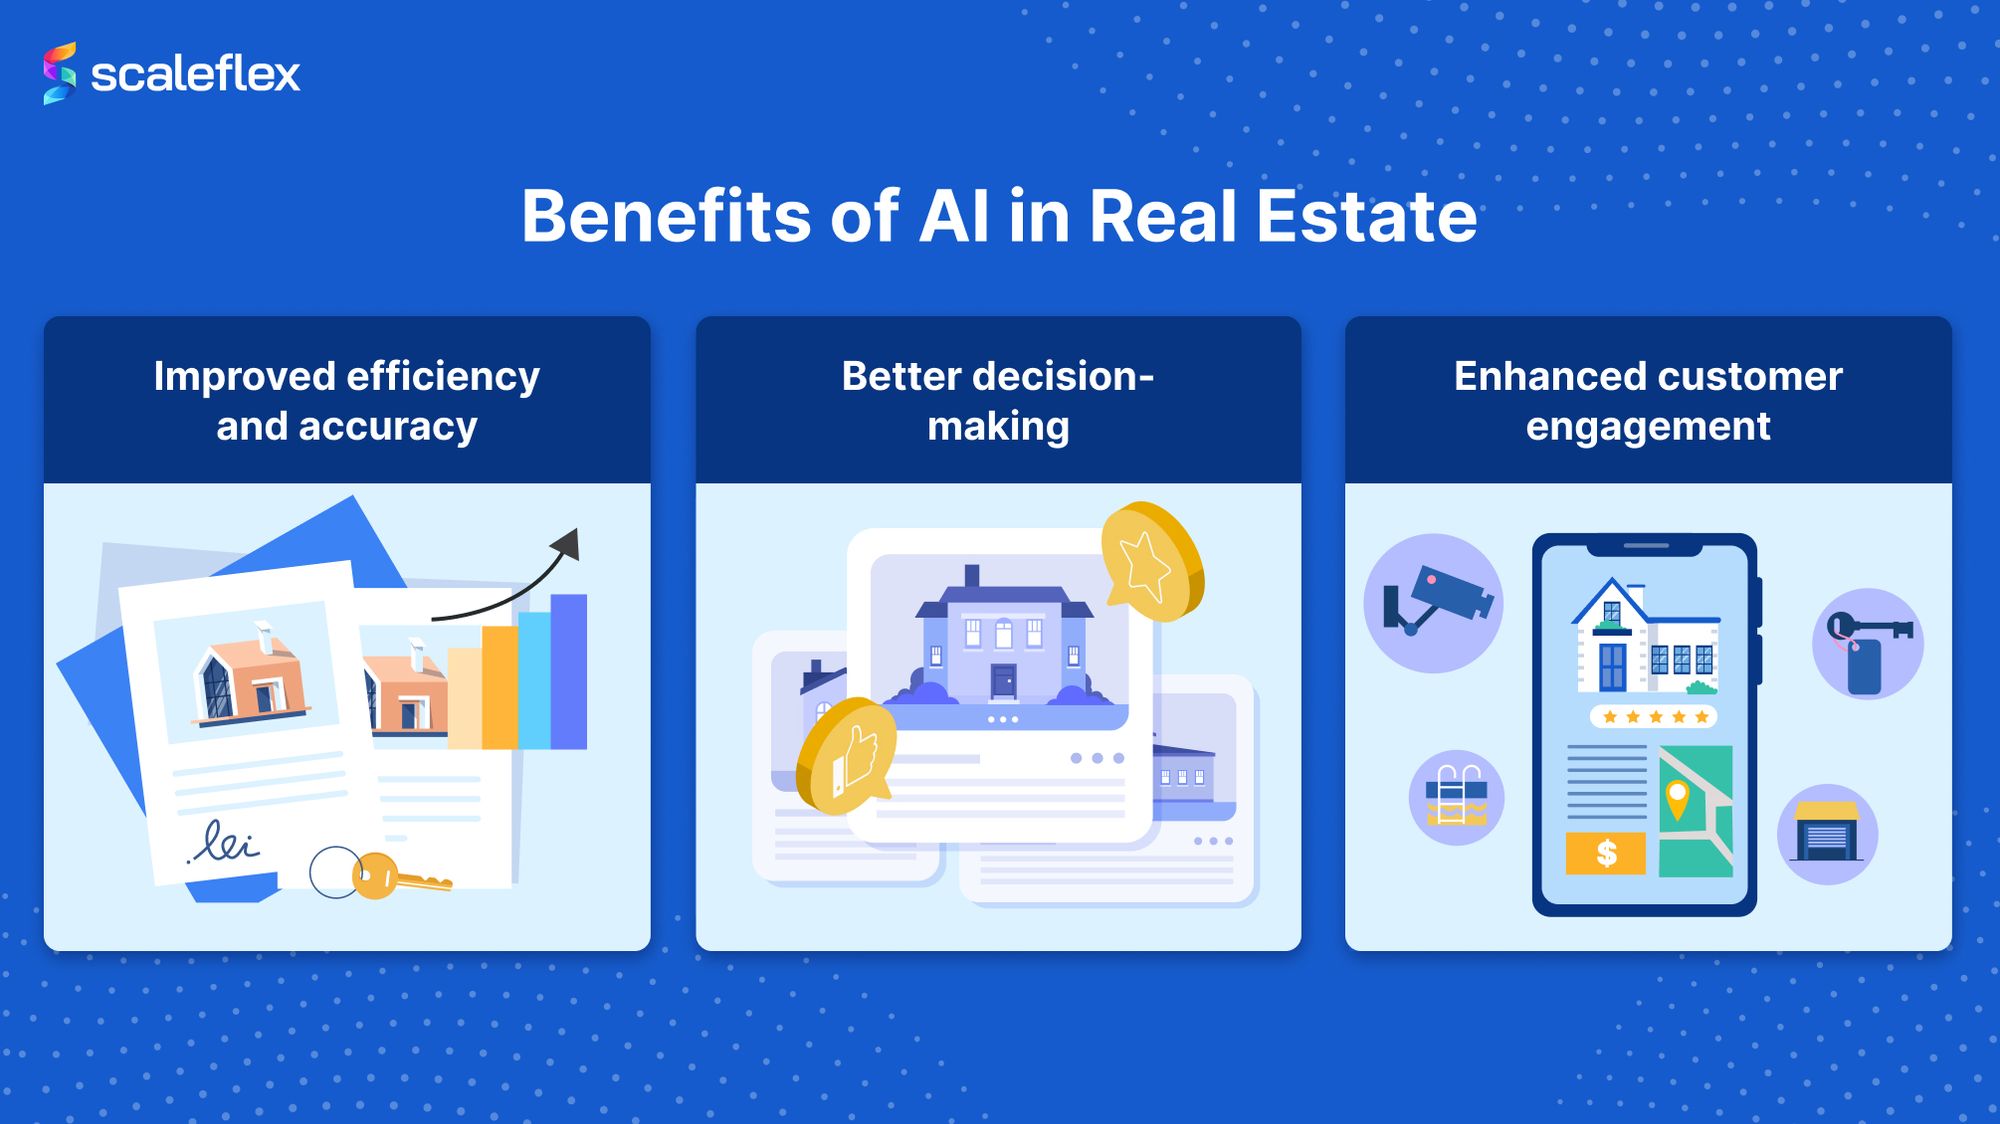 Visual representation of the benefits of AI in real estate